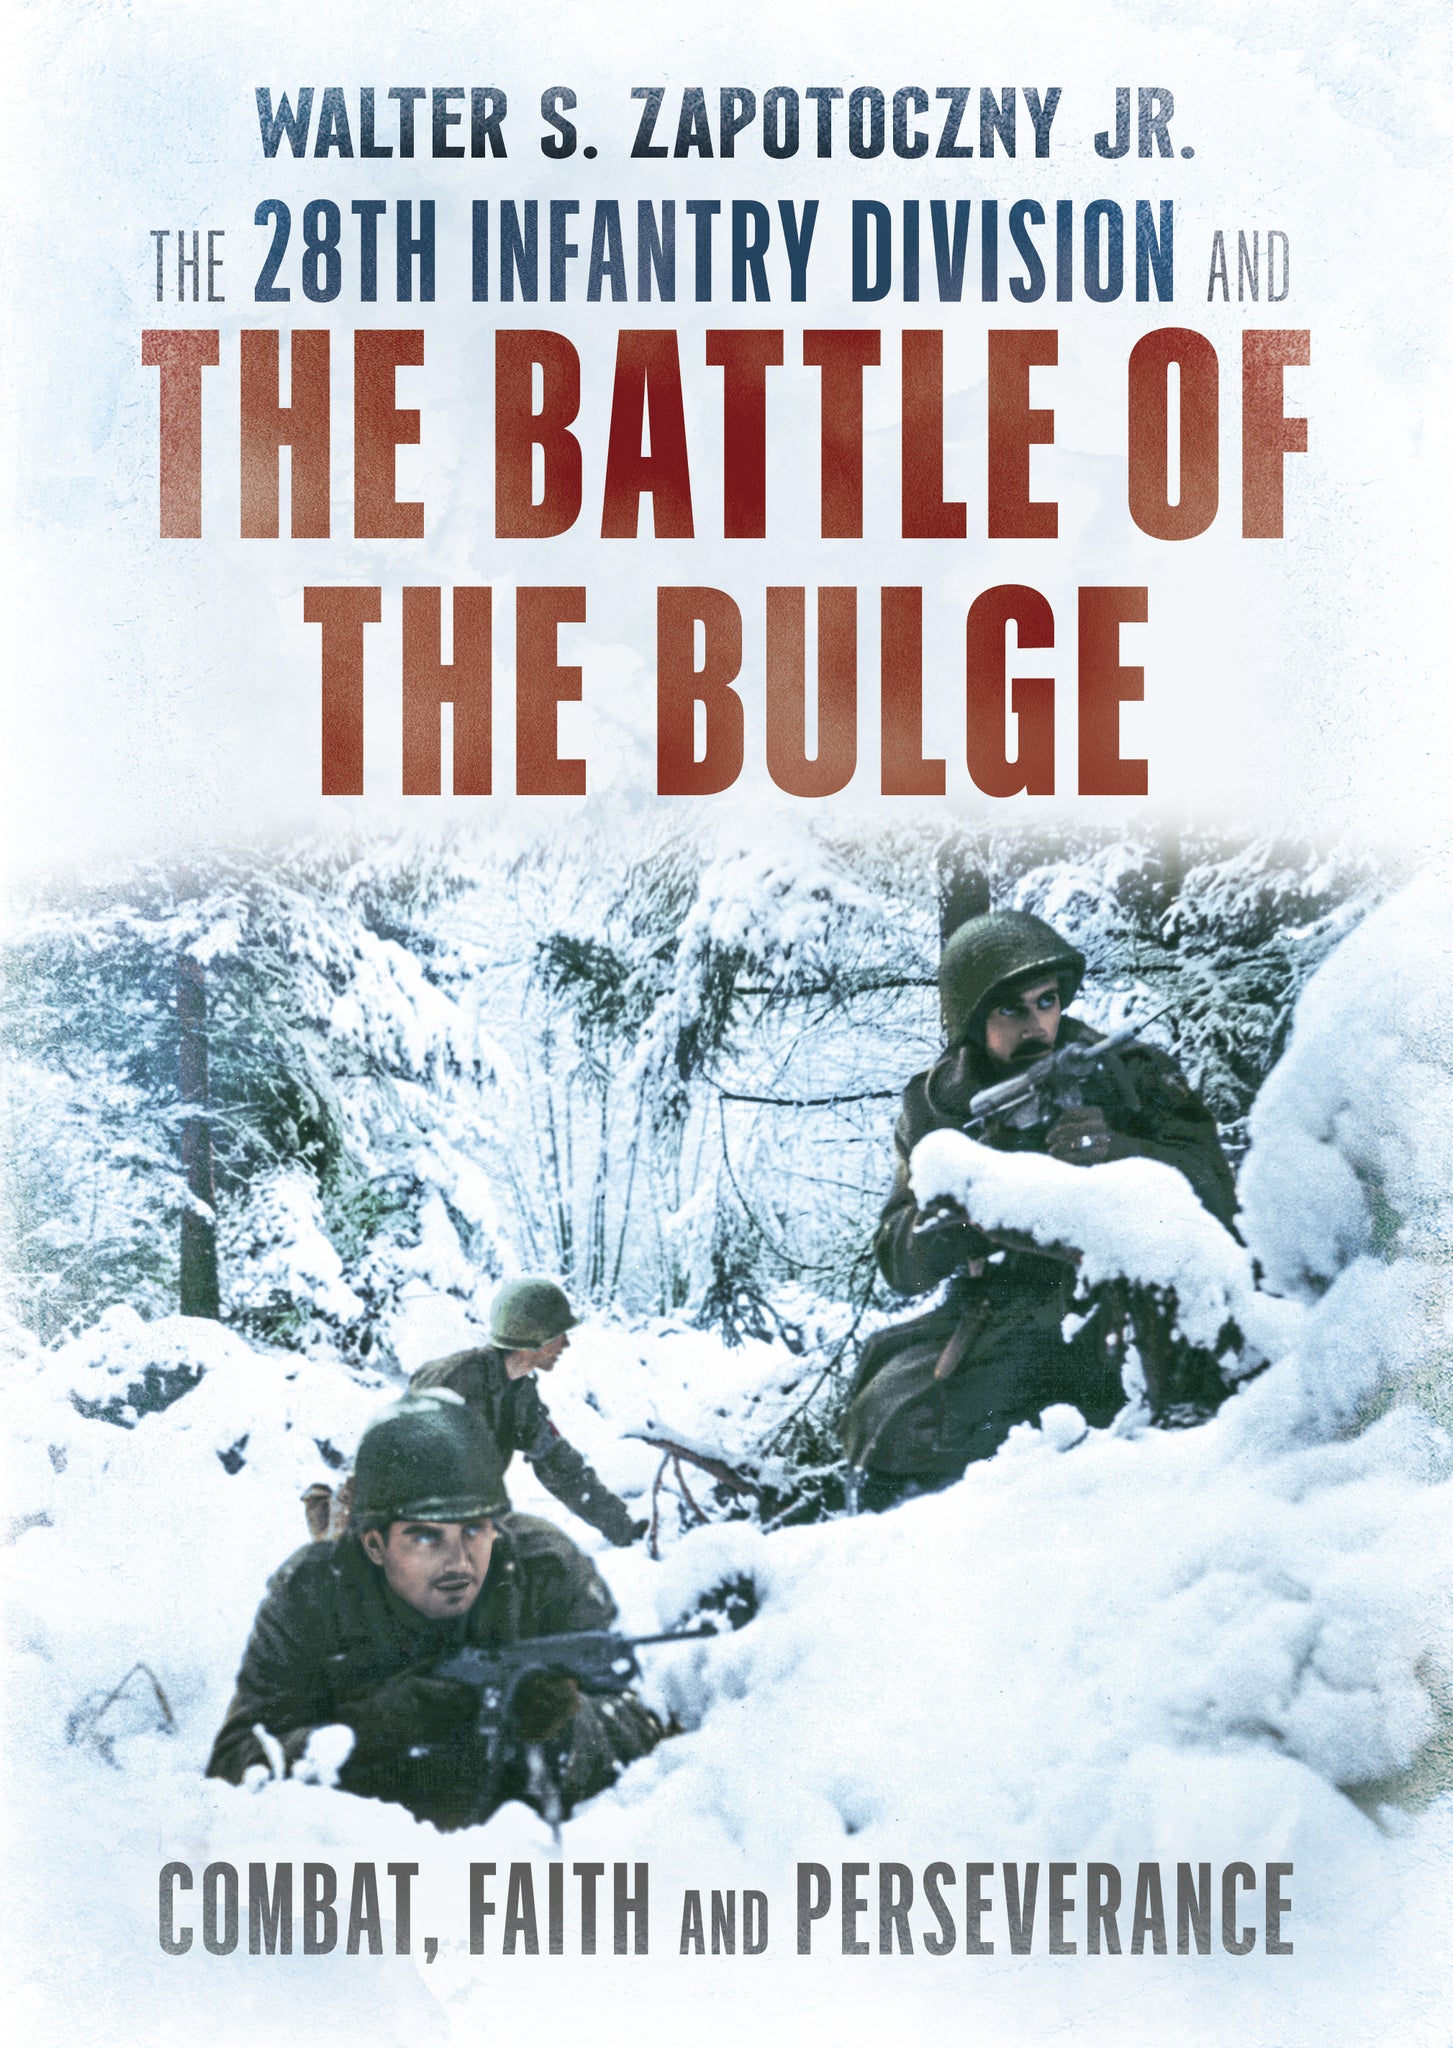 The 28th Infantry Division and the Battle of the Bulge